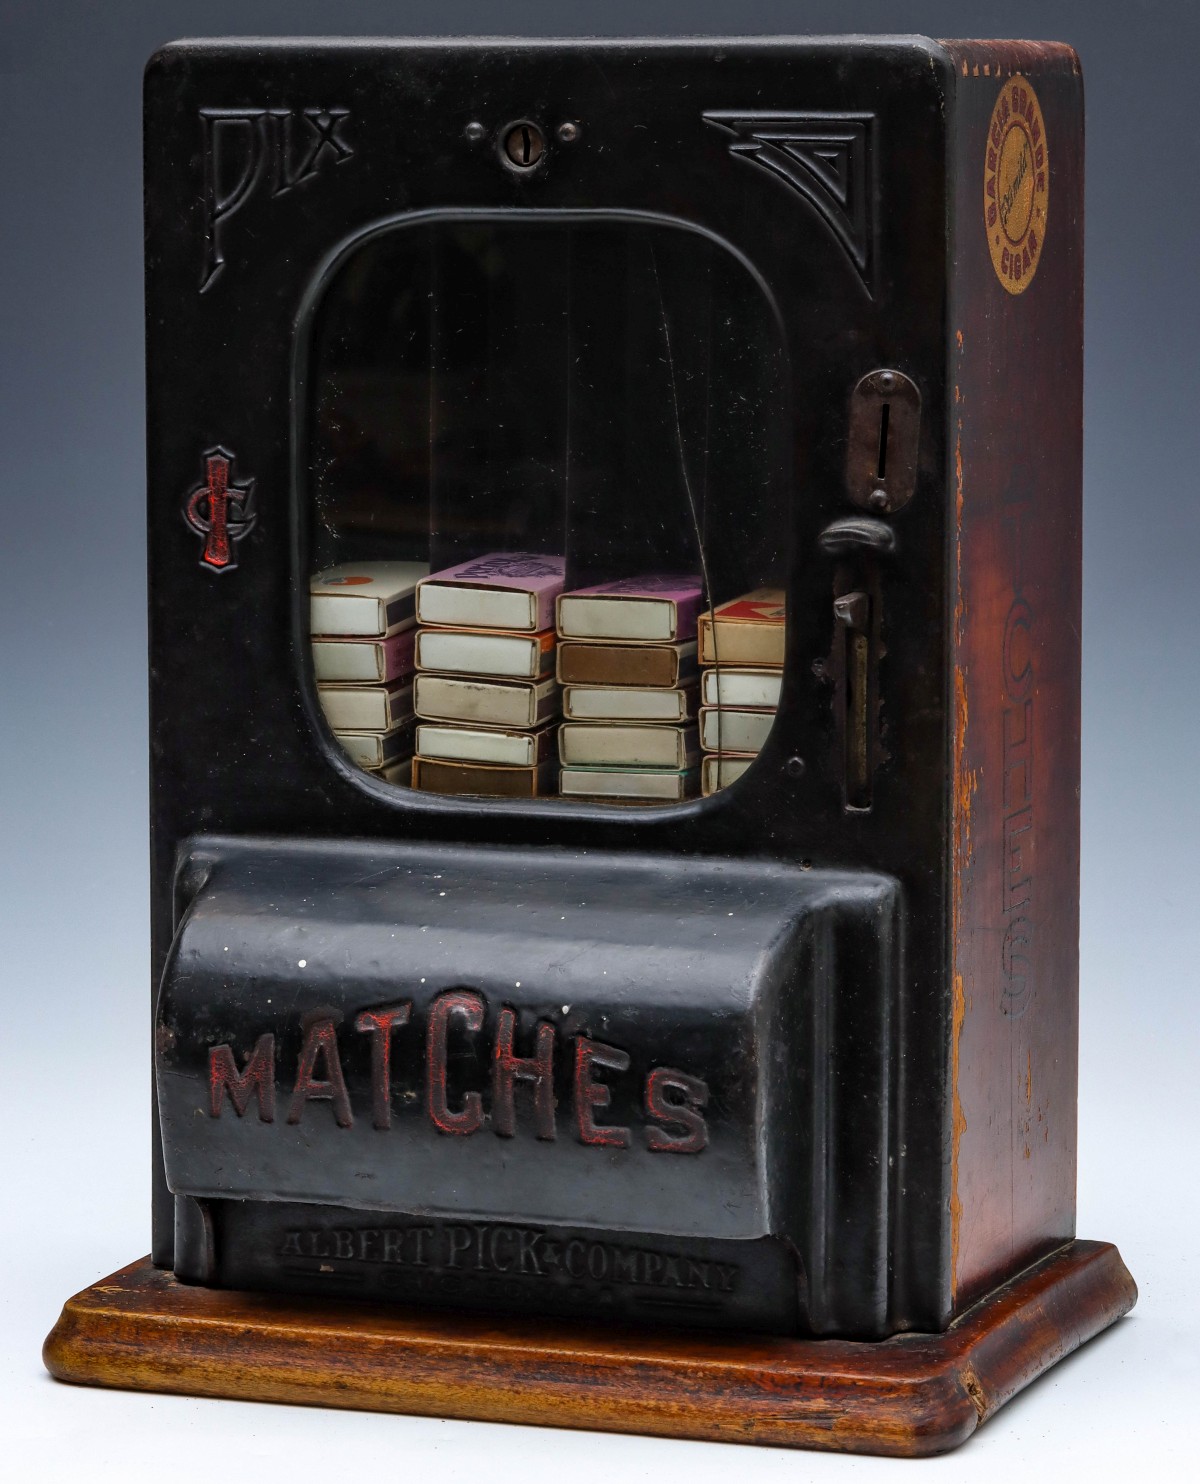 A ONE CENT BOXED MATCHES VENDING MACHINE CIRCA 1920s